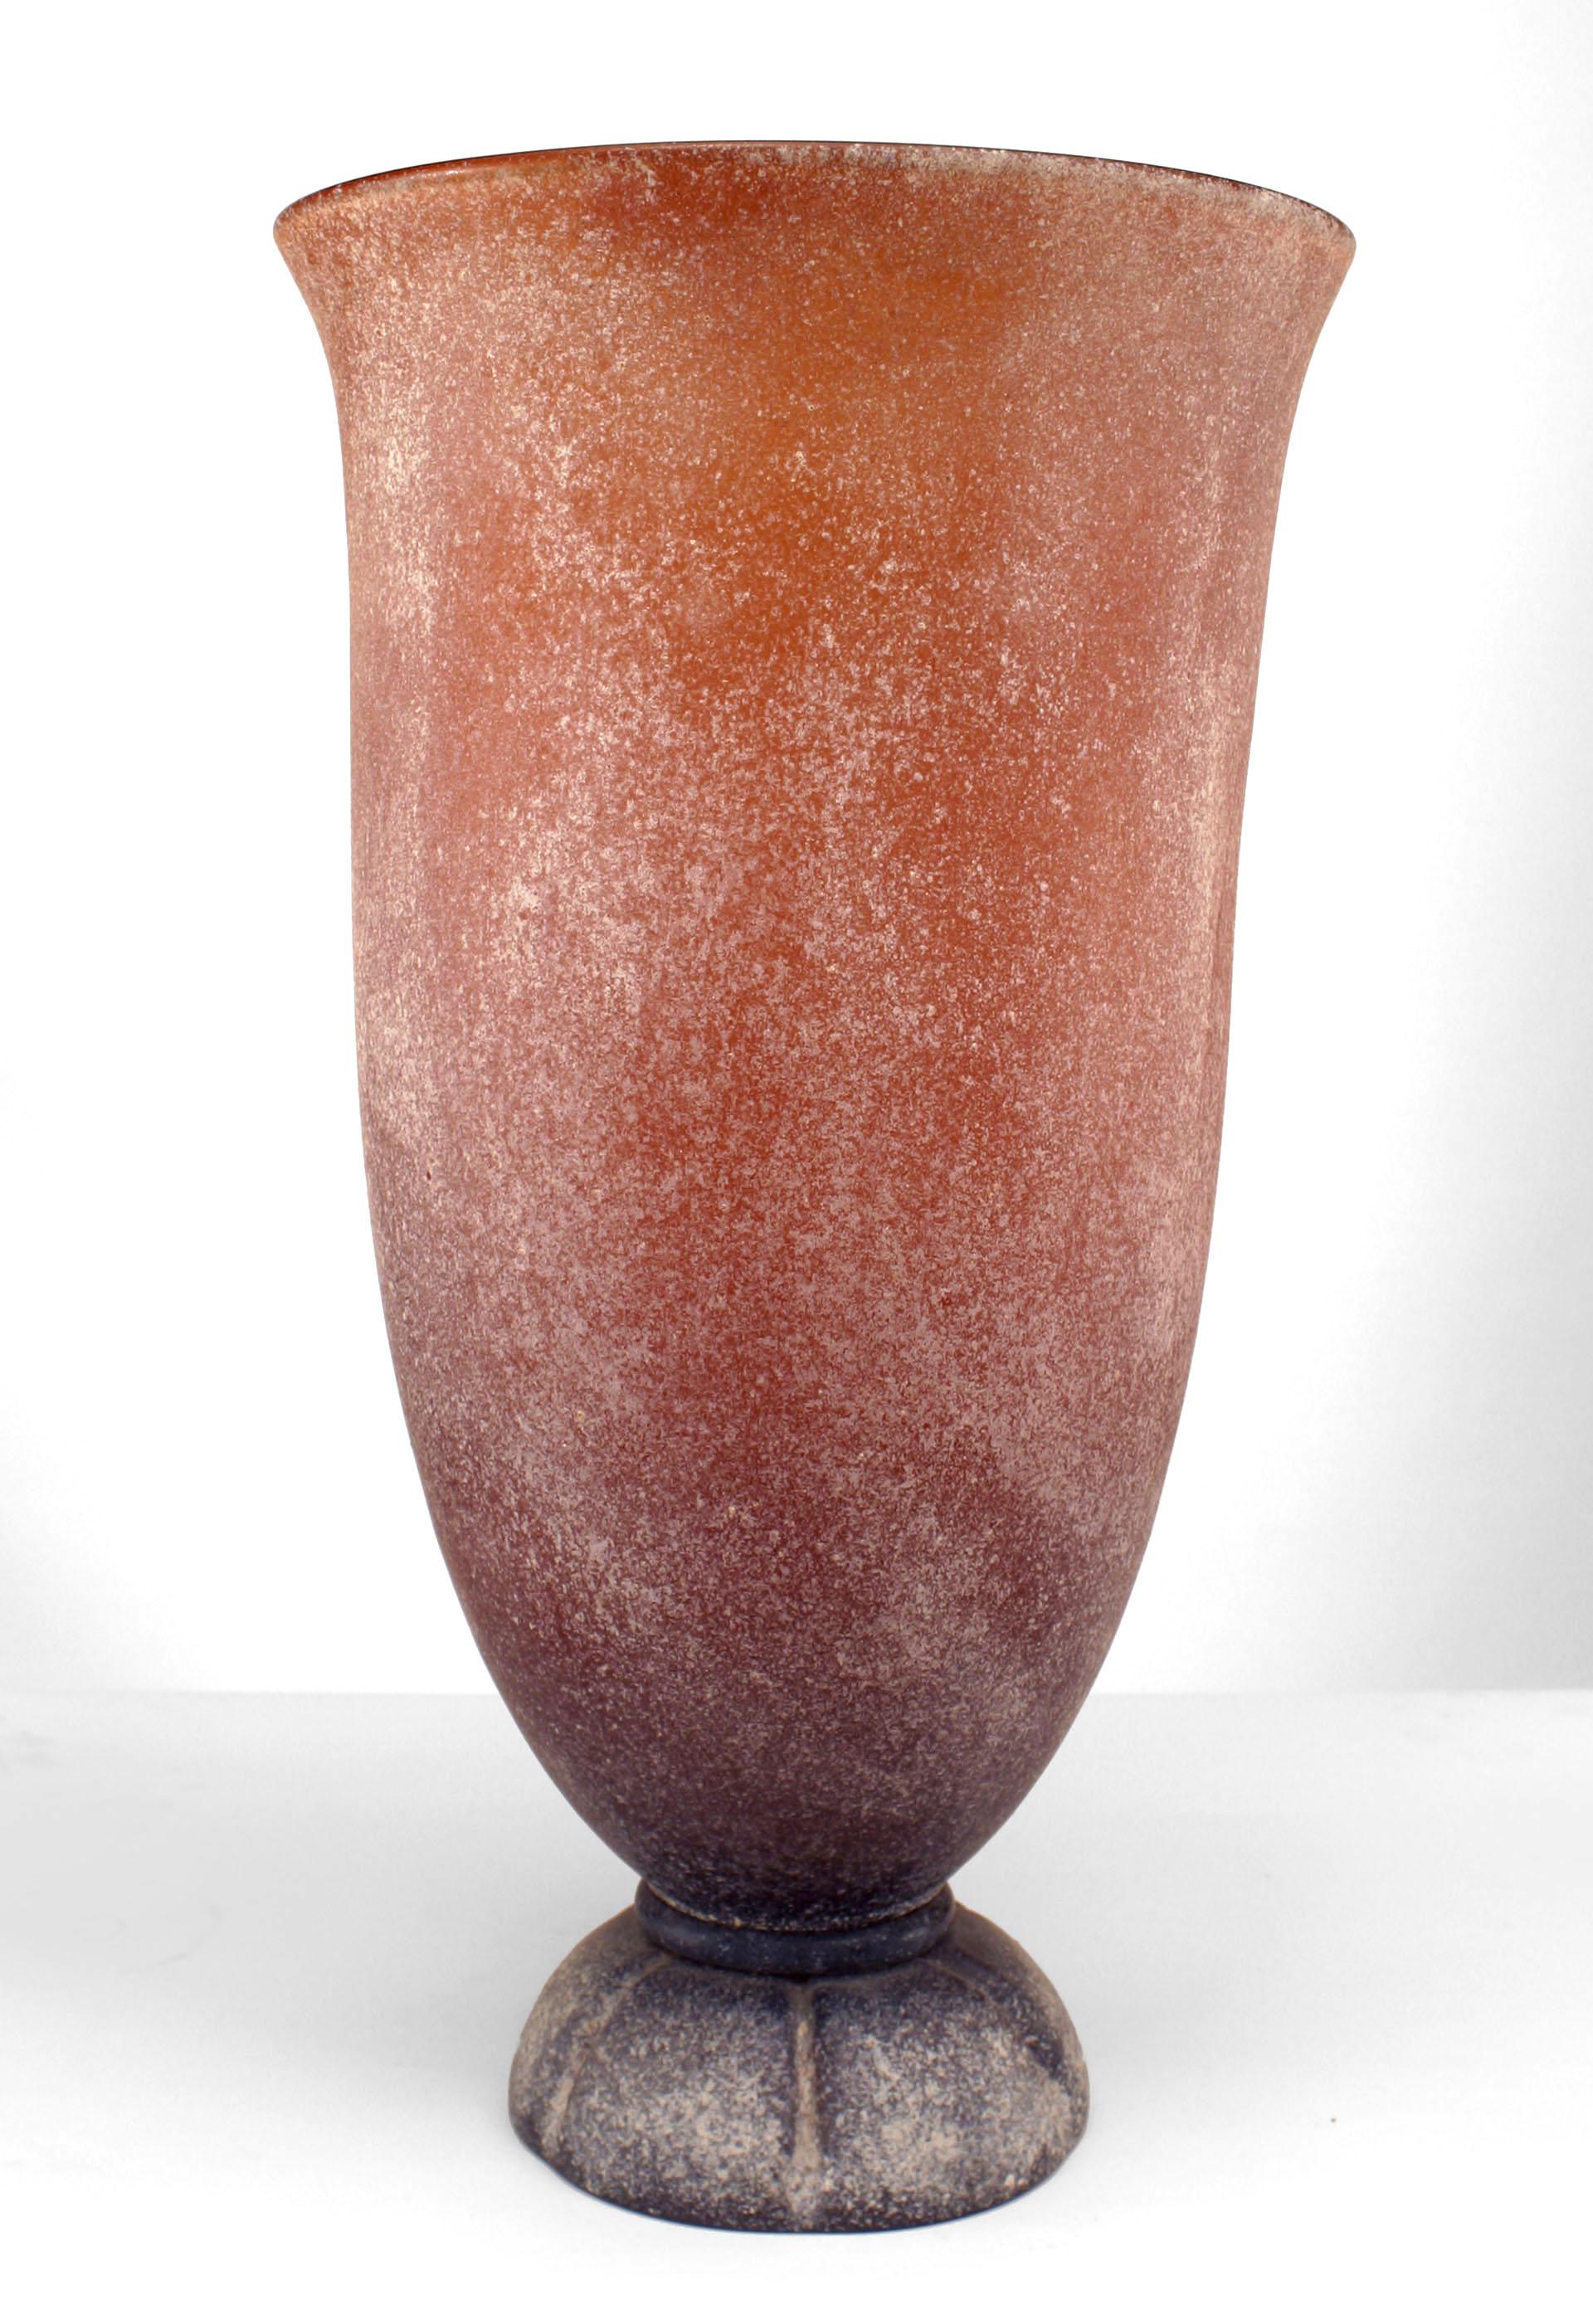 Signed by Karl Springer, this monumental art glass vases dates to the 1970's and is characterized by its textured, rust colored, and speckled white glass surface.